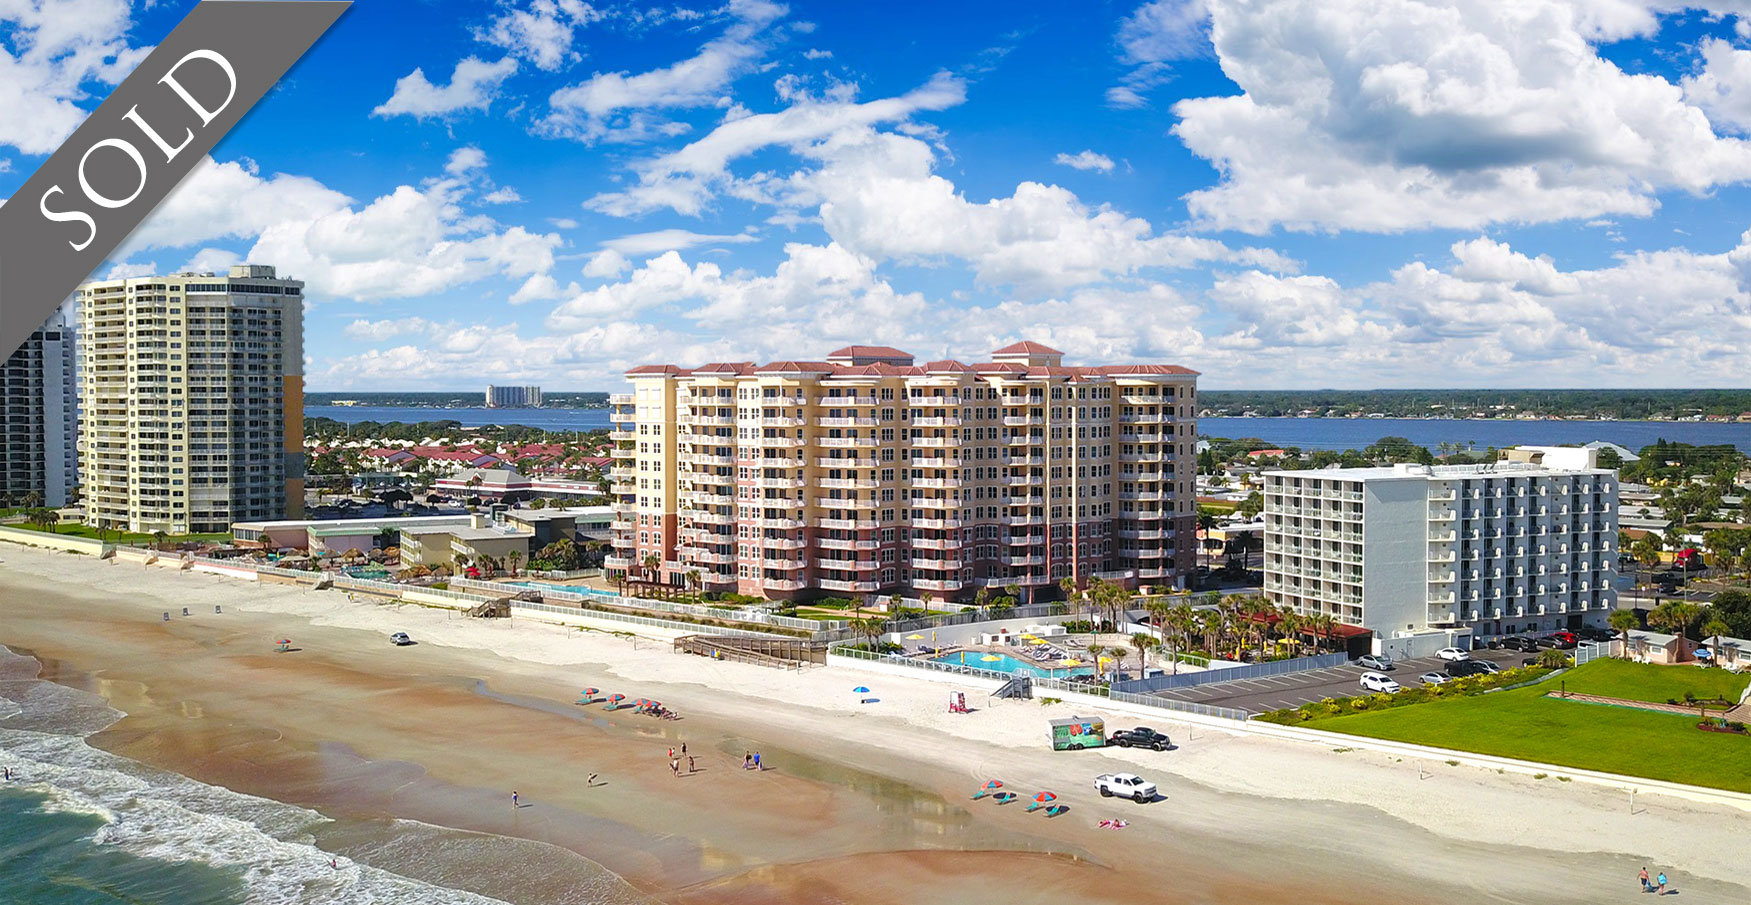 Bella Vista oceanfront condos For Sale at 2515 S Atlantic Ave Daytona Beach  Shores Just Sold The LUXE Group 386-299-4043